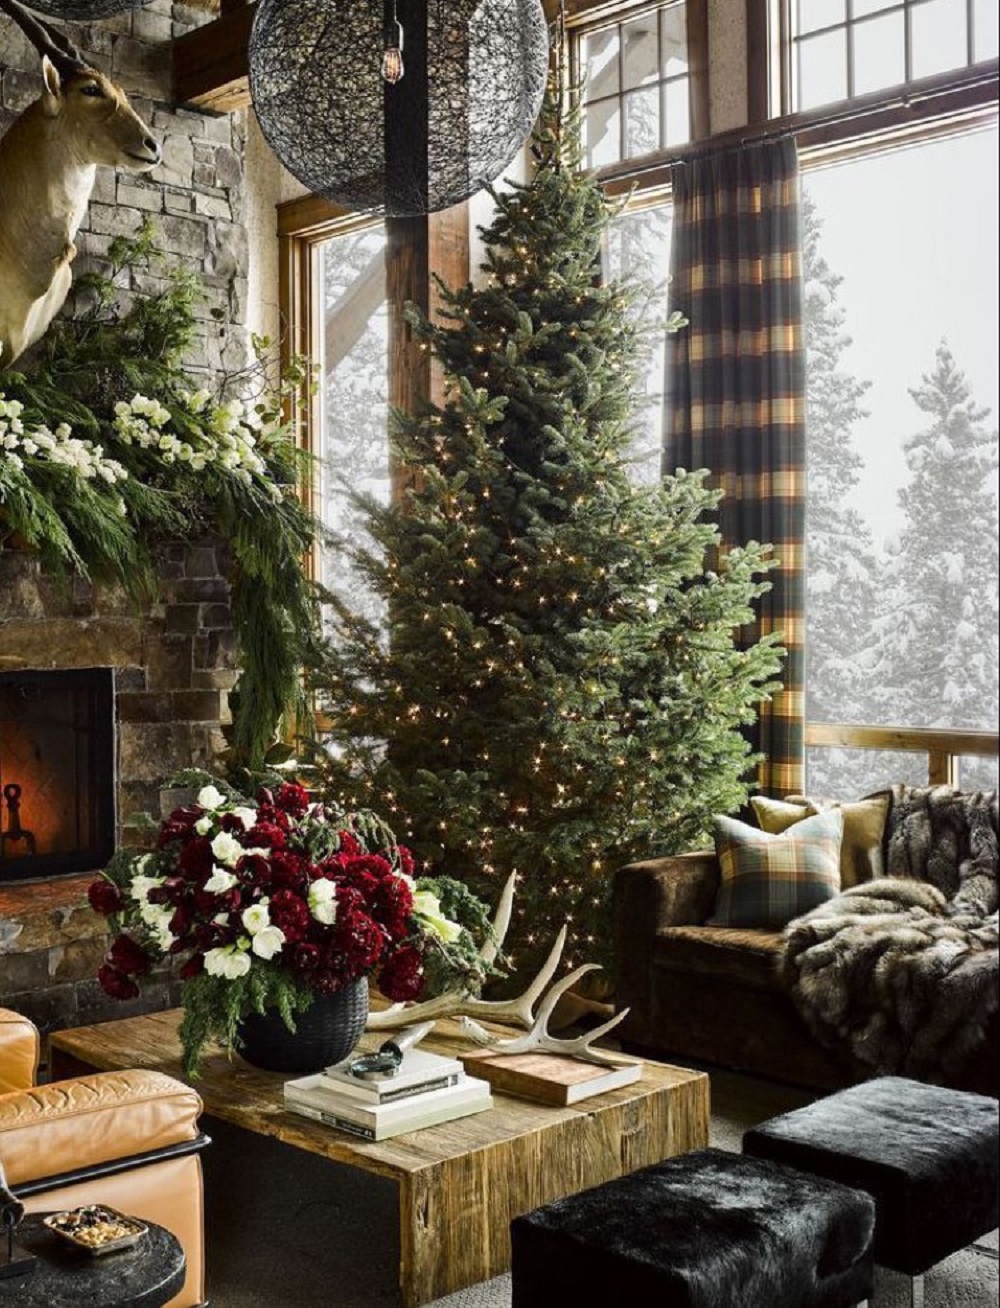 t3-4 Christmas living room decorations you must try in the holiday season